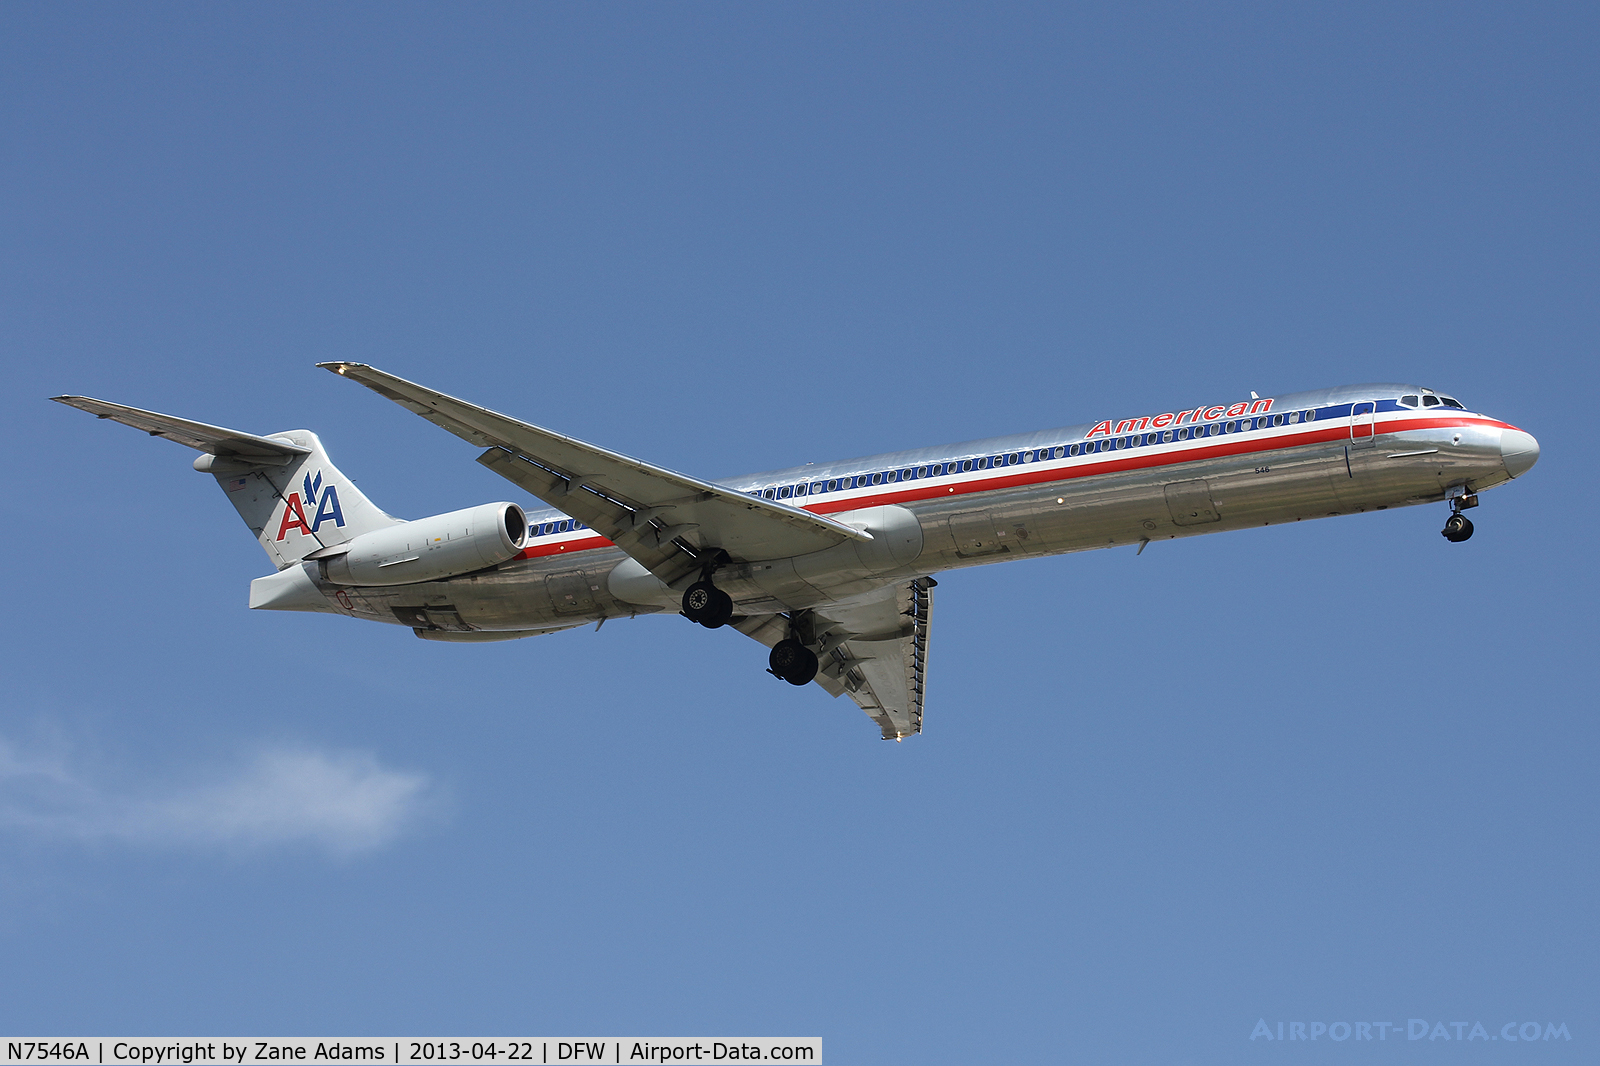 N7546A, 1990 McDonnell Douglas MD-82 (DC-9-82) C/N 53028, American Airlines at DFW Airport